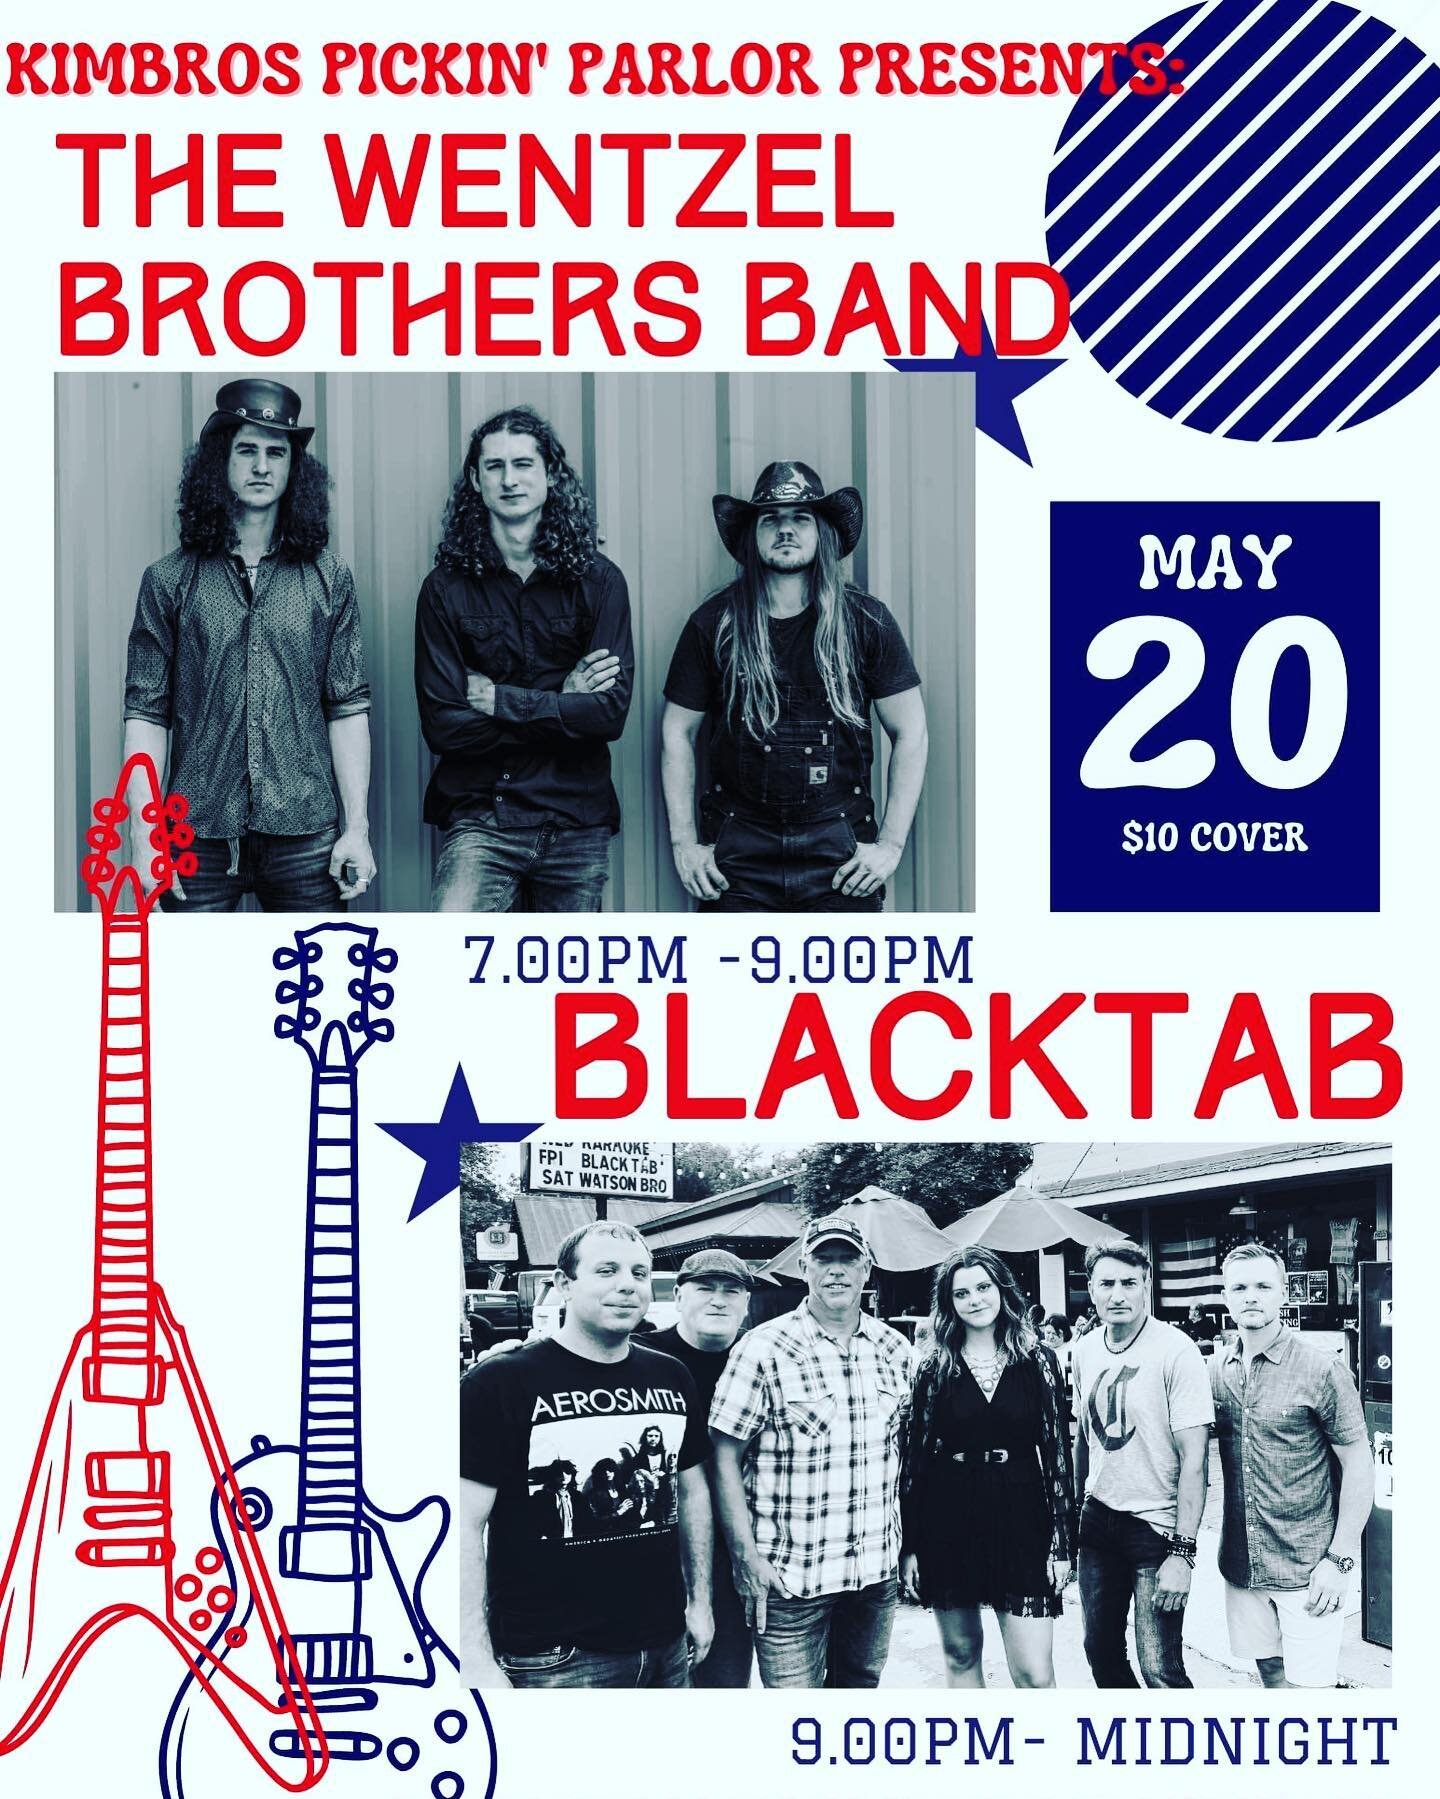 Tonight we&rsquo;ve got local favorites The Wentzel Brothers along with Blacktab the band!  You guys don&rsquo;t want to miss this high energy rock and roll show!  7PM!